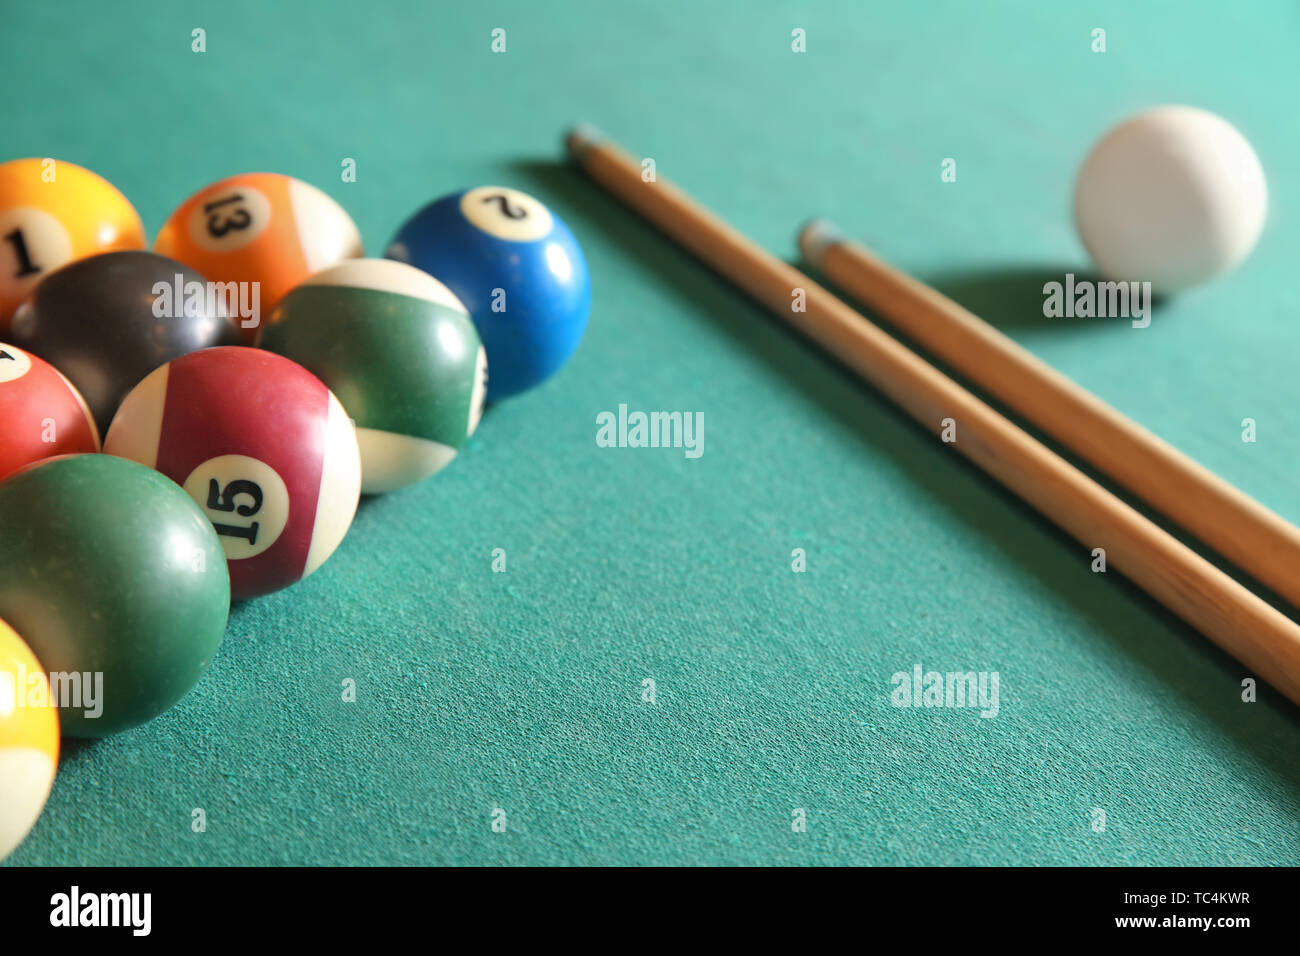 Billiard balls with cues on table Stock Photo